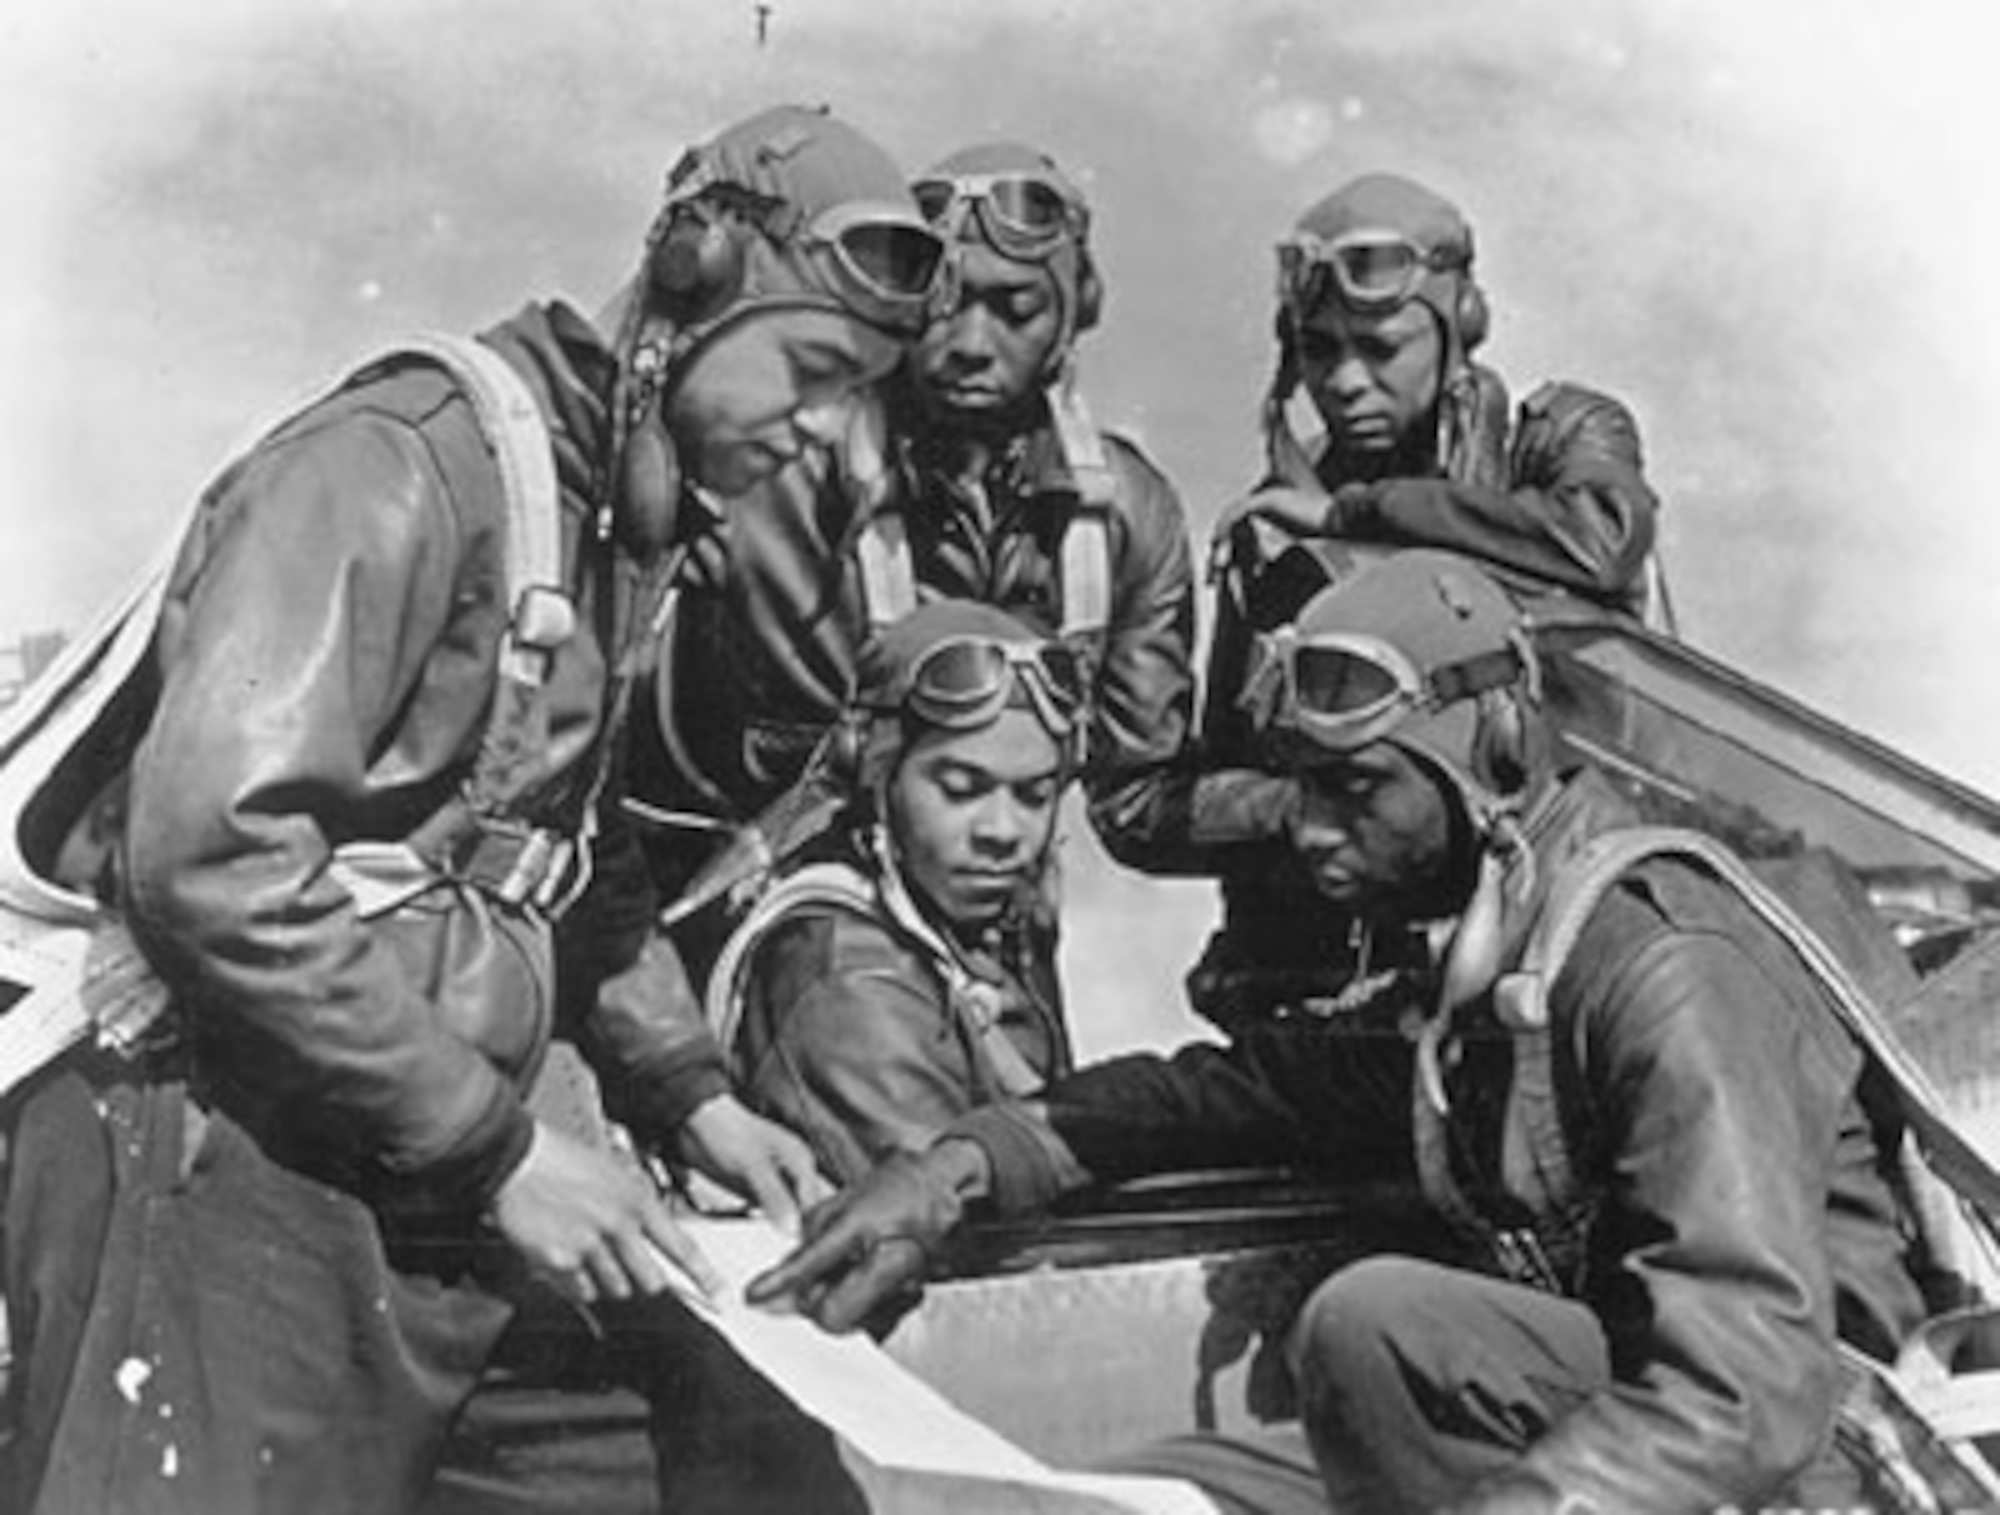 The Tuskegee Airmen were the first African American pilots who fought in World War II. They made up the 332nd Fighter Group and 477th Bombardment Group of the U.S. Army Air Forces. The Tuskegee Airmen, were the first African American U.S. military pilots in America’s history. (Courtesy photo)